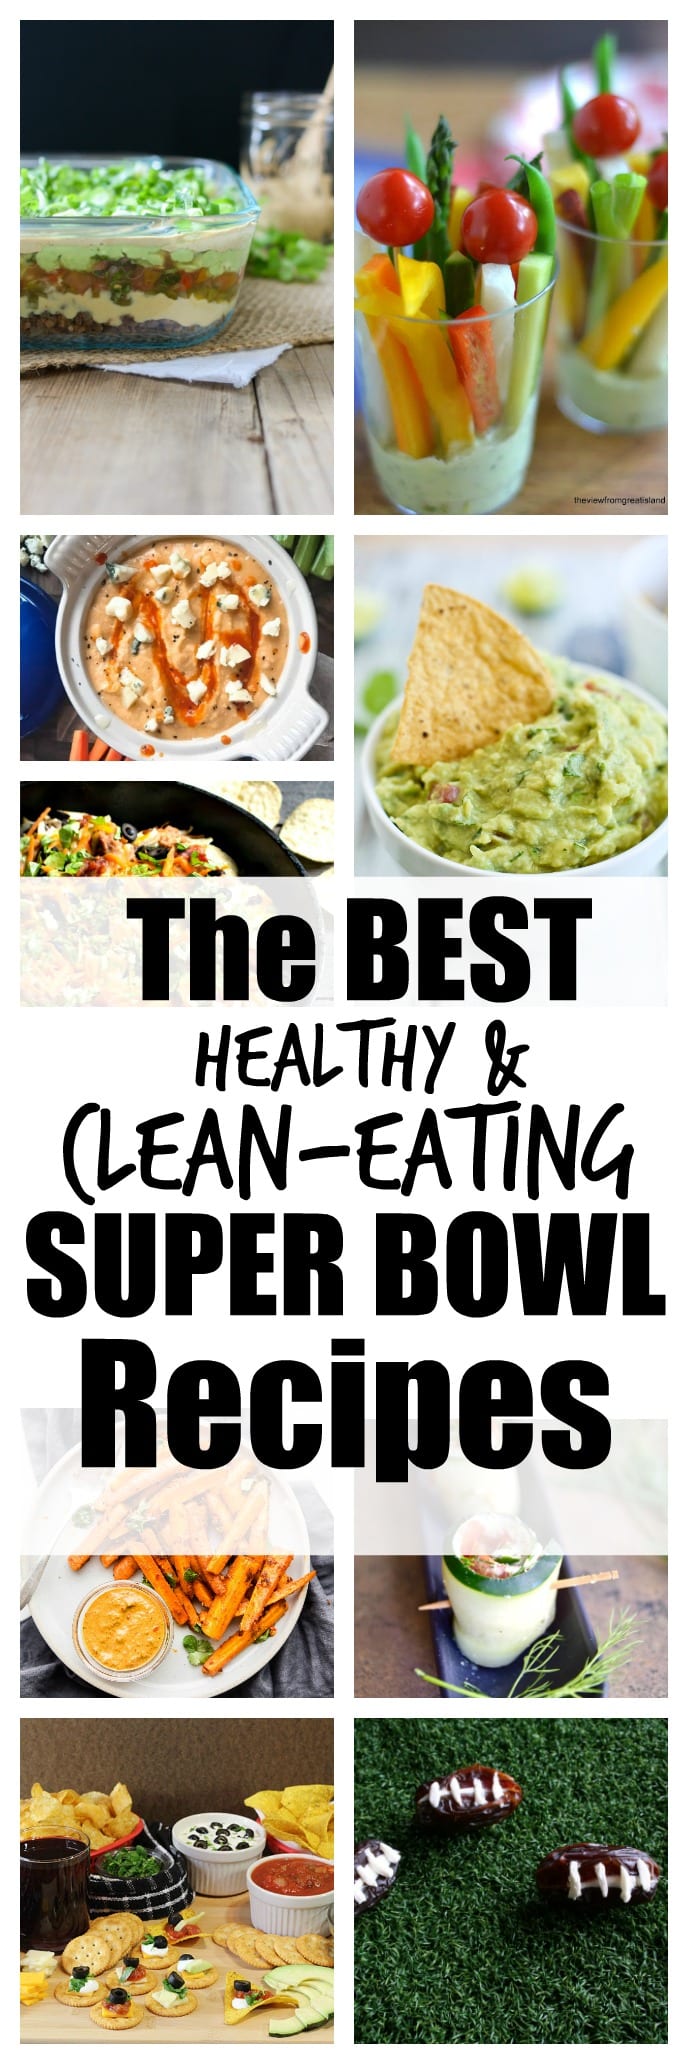 Healthy clean eating Super Bowl recipes. The ultimate list of healthy party food! Lots of gluten-free vegan and vegetarian recipes